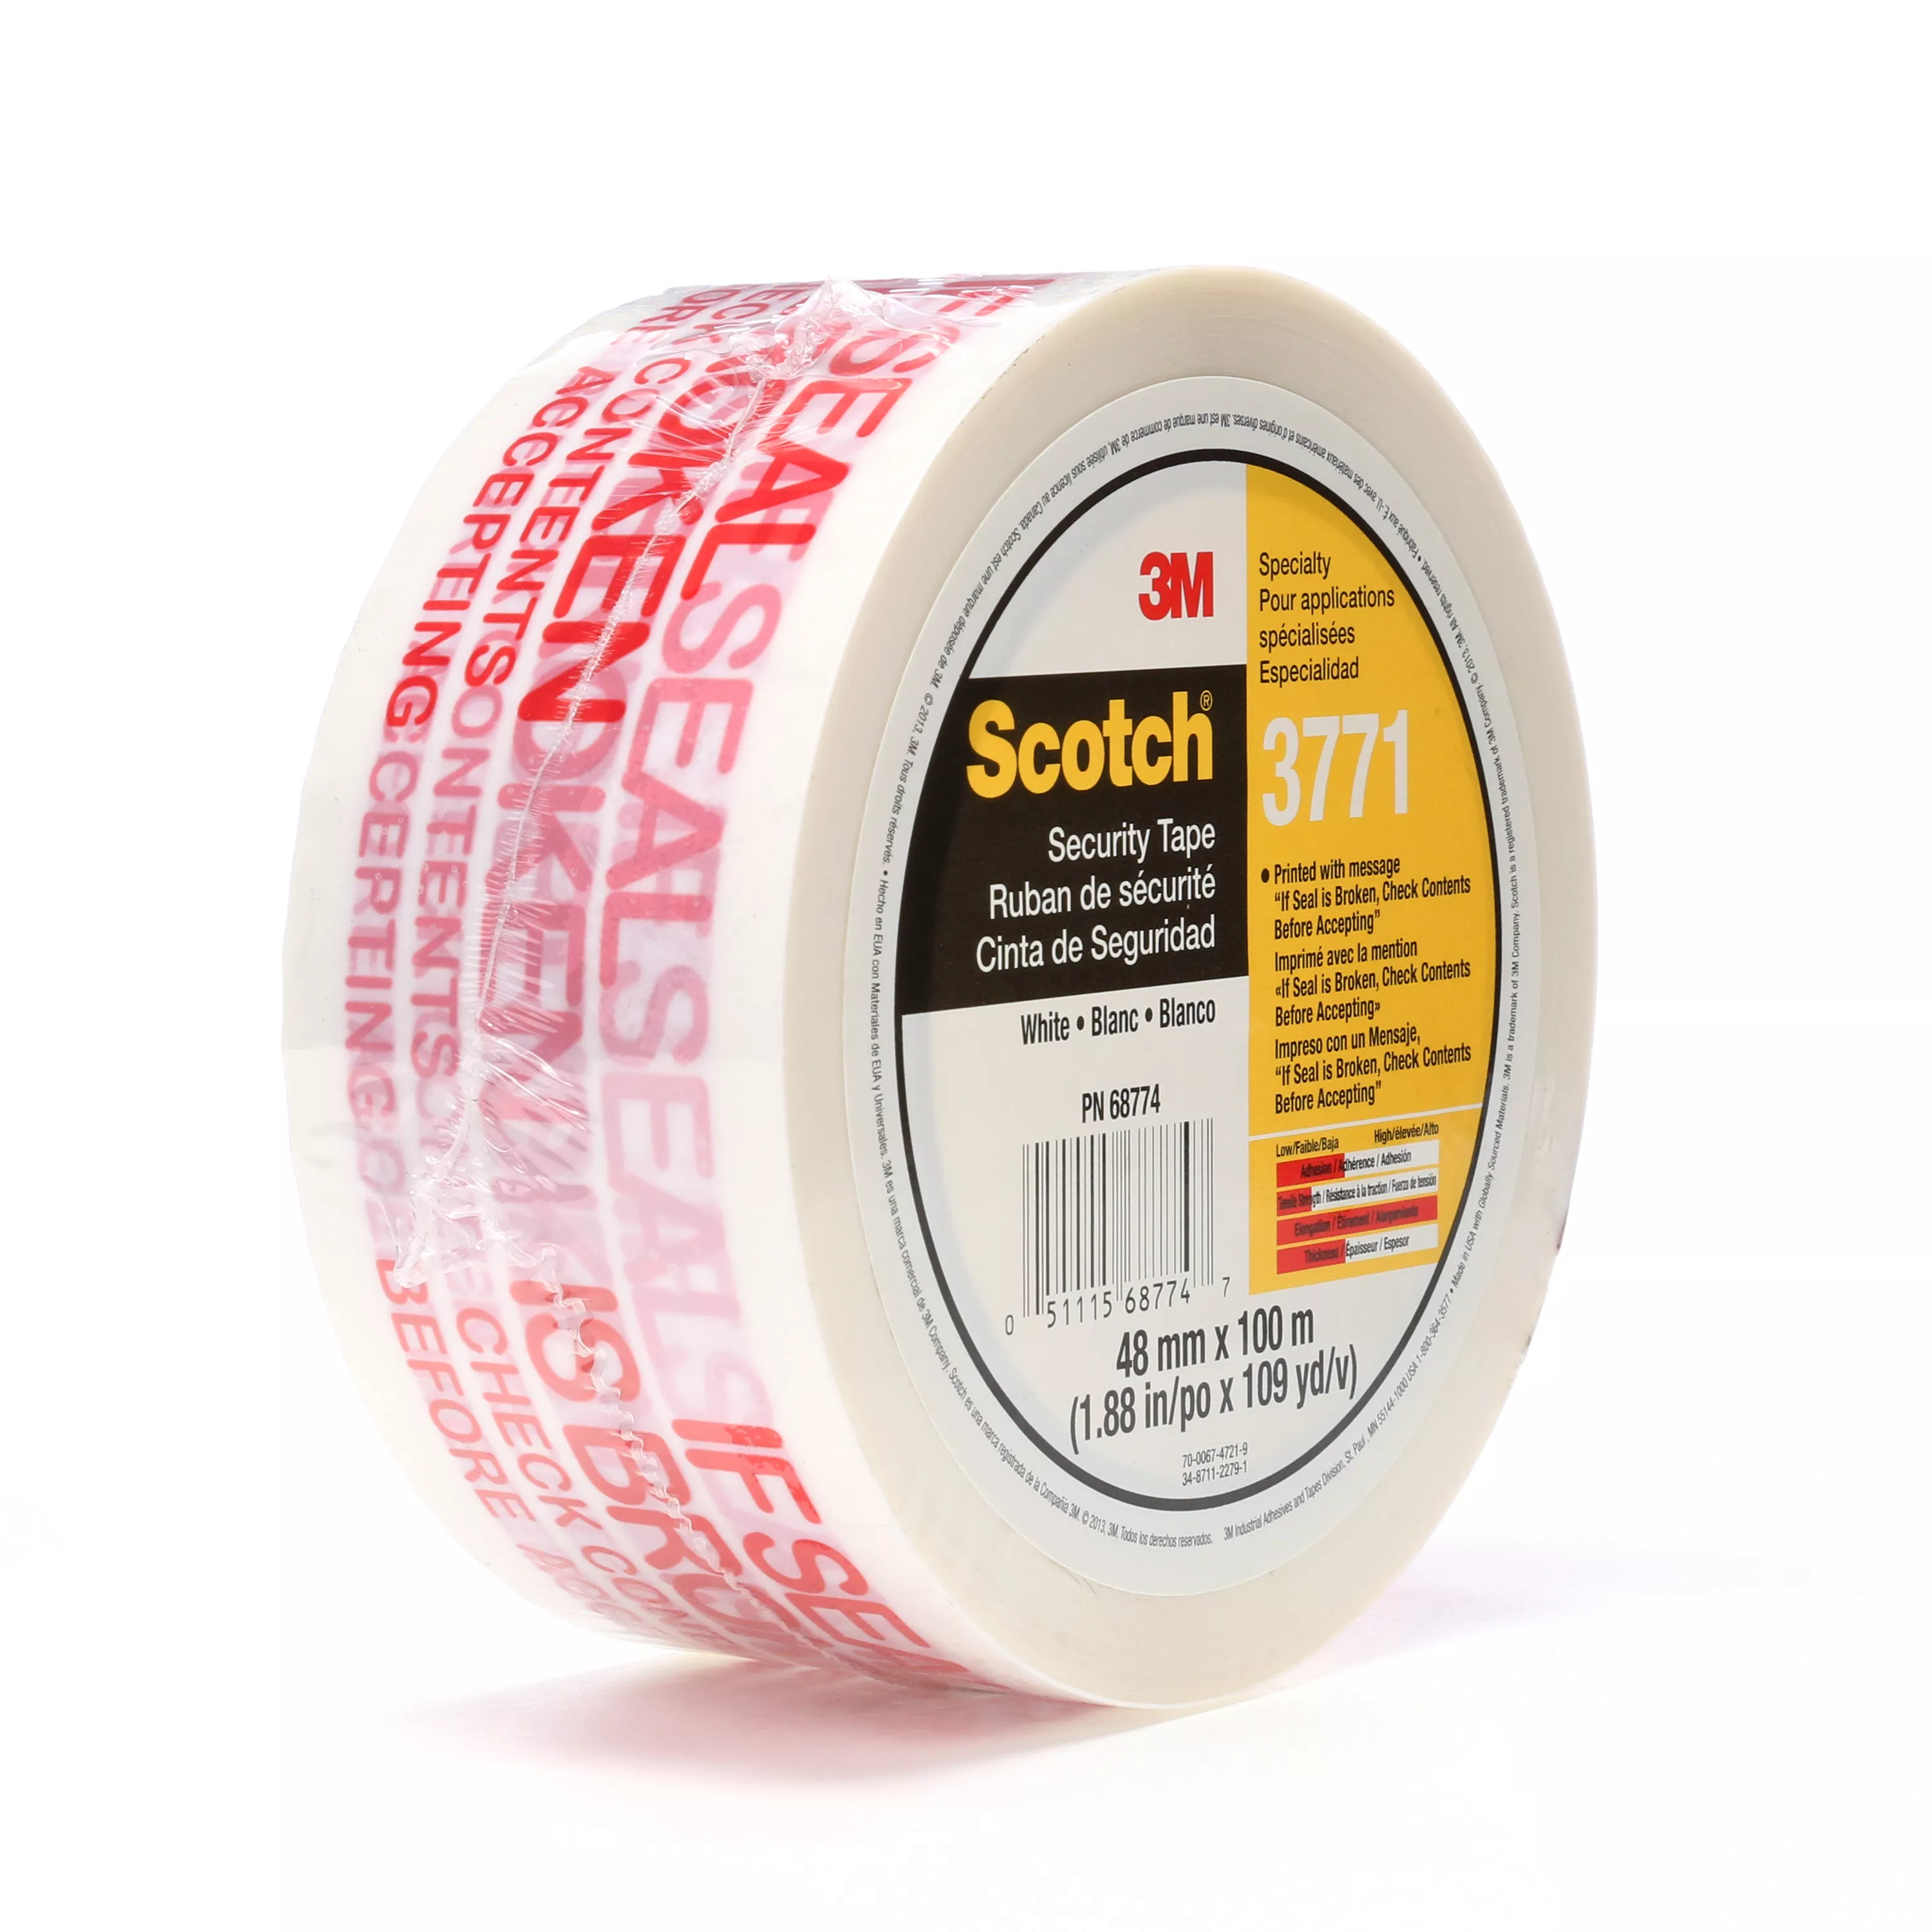 Scotch® Printed Message Box Sealing Tape 3771, White, 48 mm x 100 m, (6
roll/pack 6 pack/case) 36/case, Conveniently Packaged